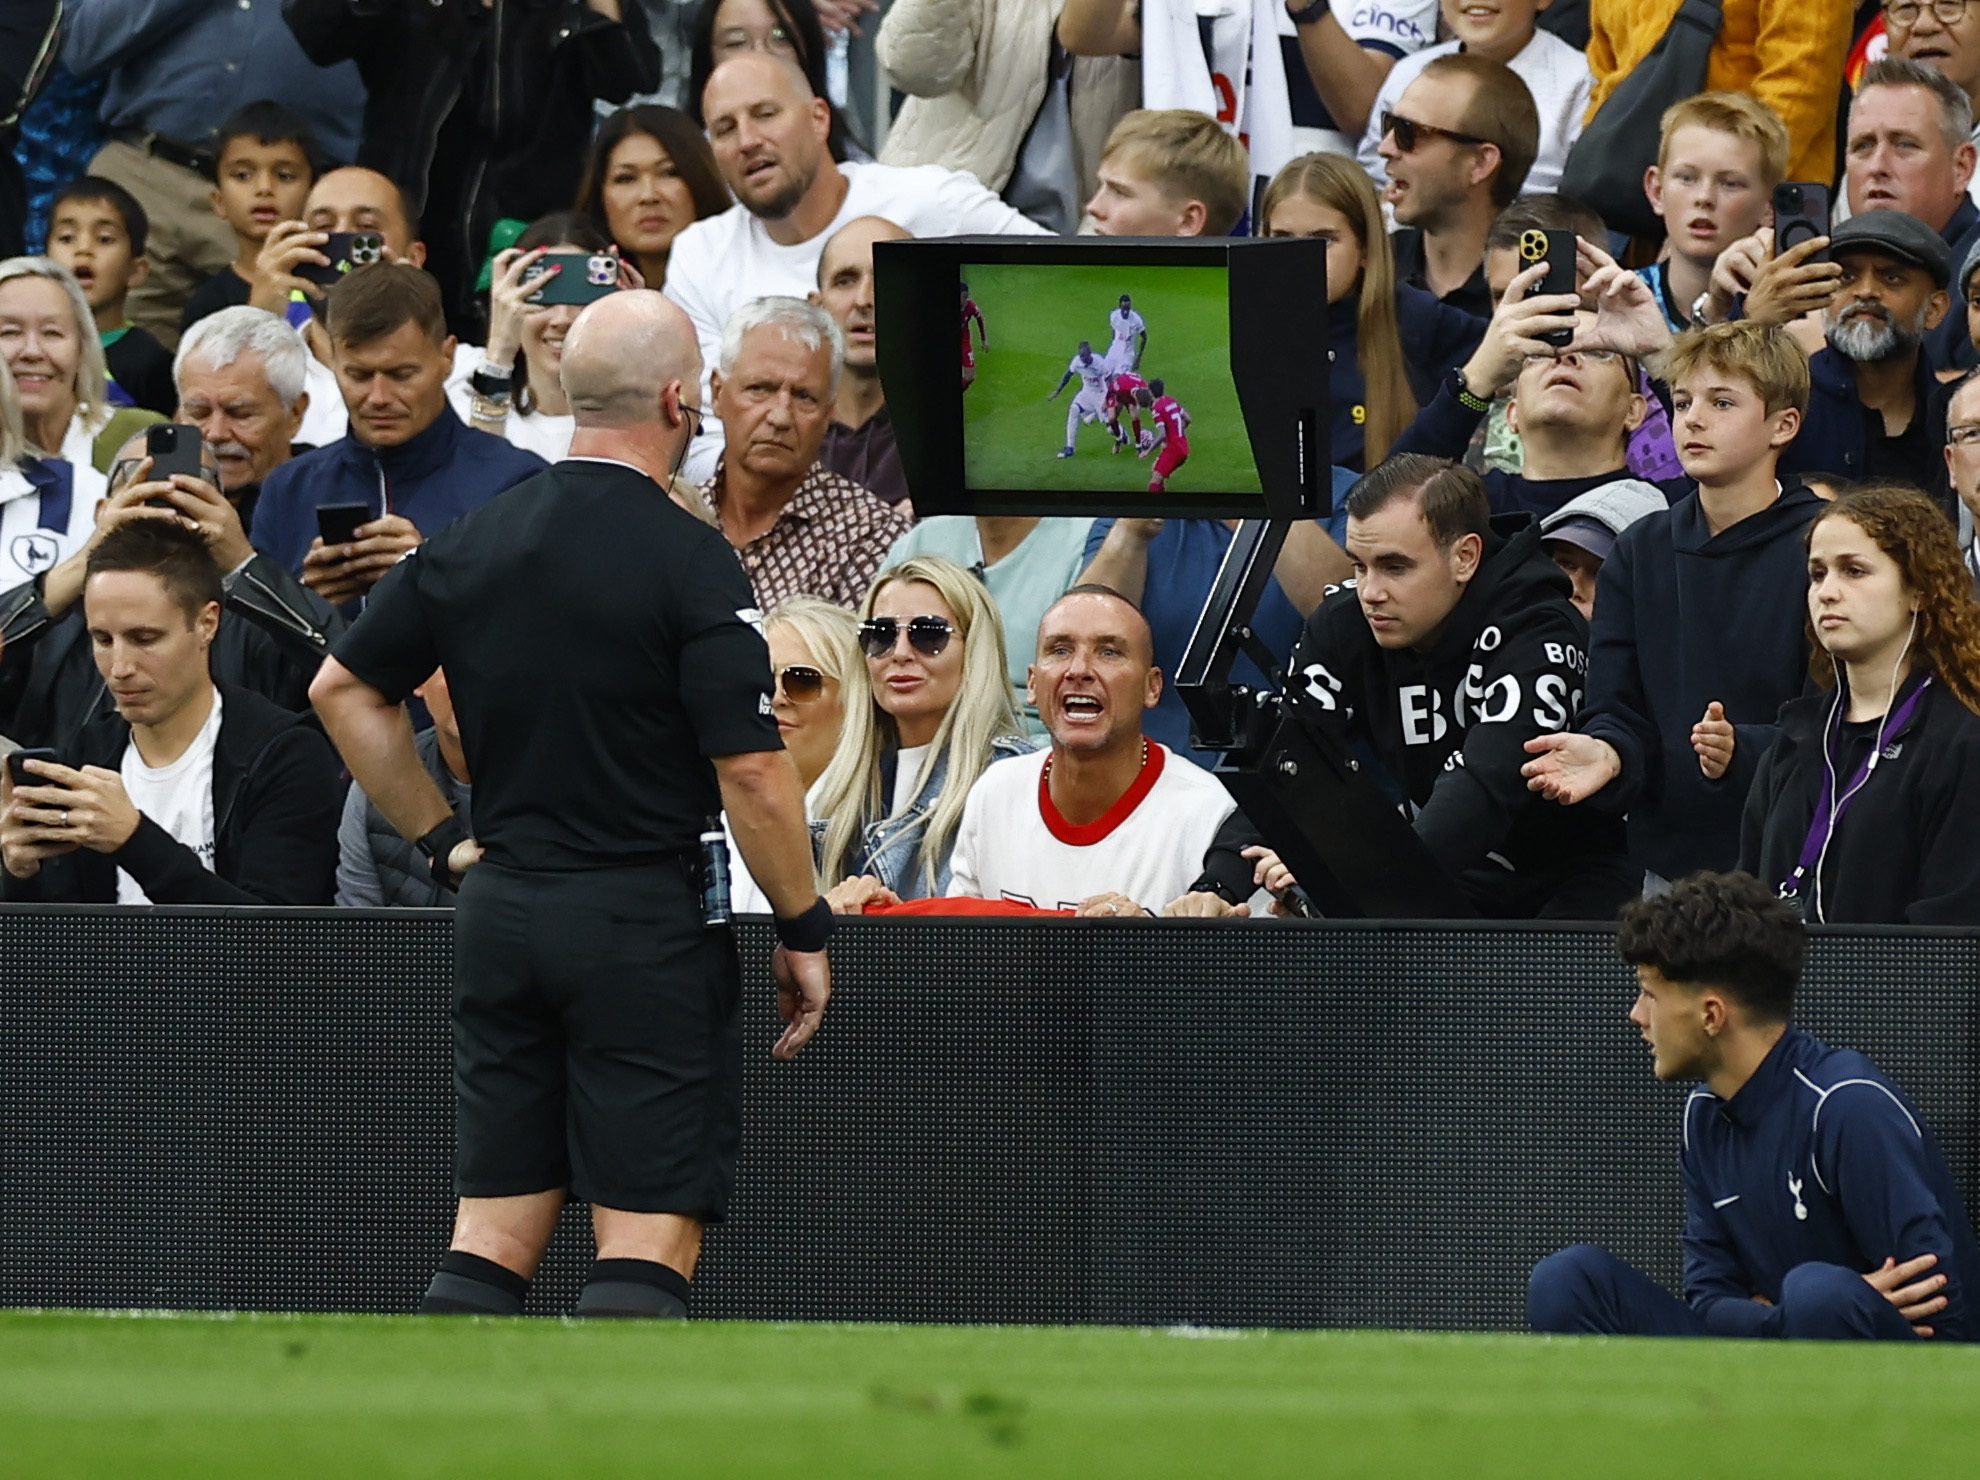 PGMOL called British Airways pilots to help out in VAR decision-making after Liverpool Tottenham game. 